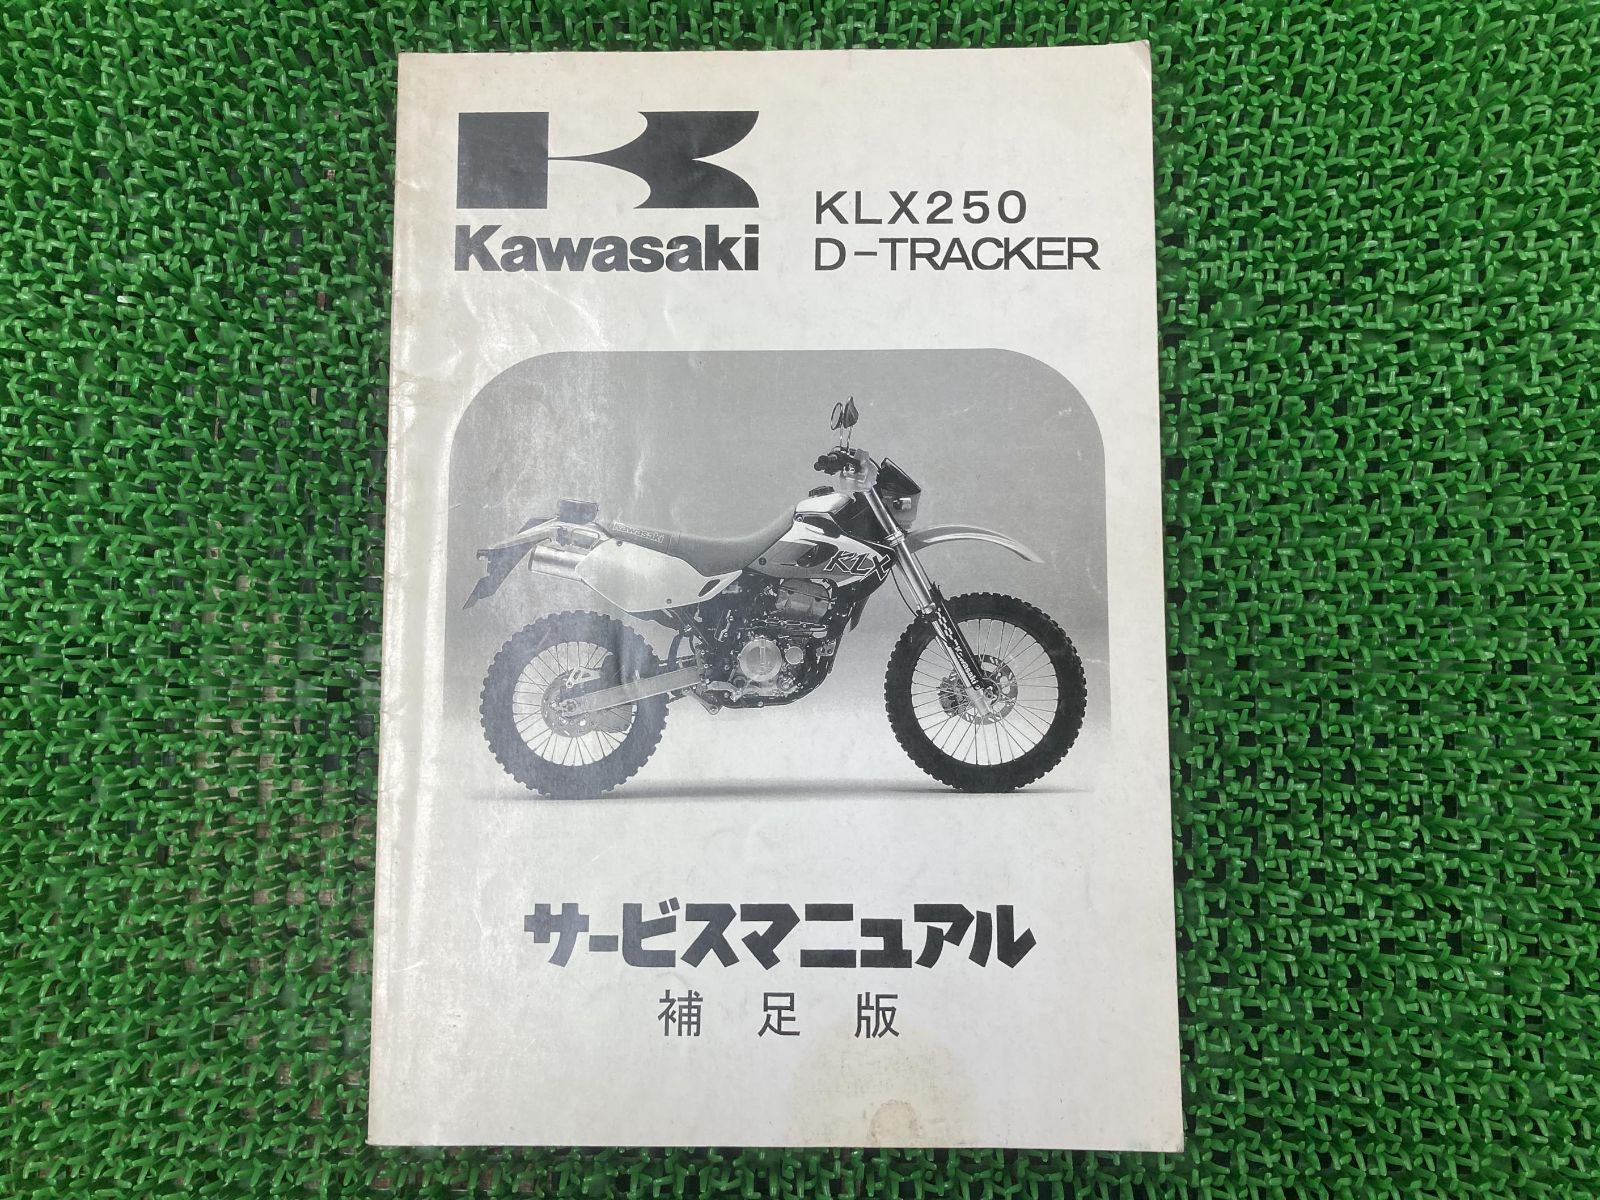 KLX250 サービスマニュアル | www.outplayed.it